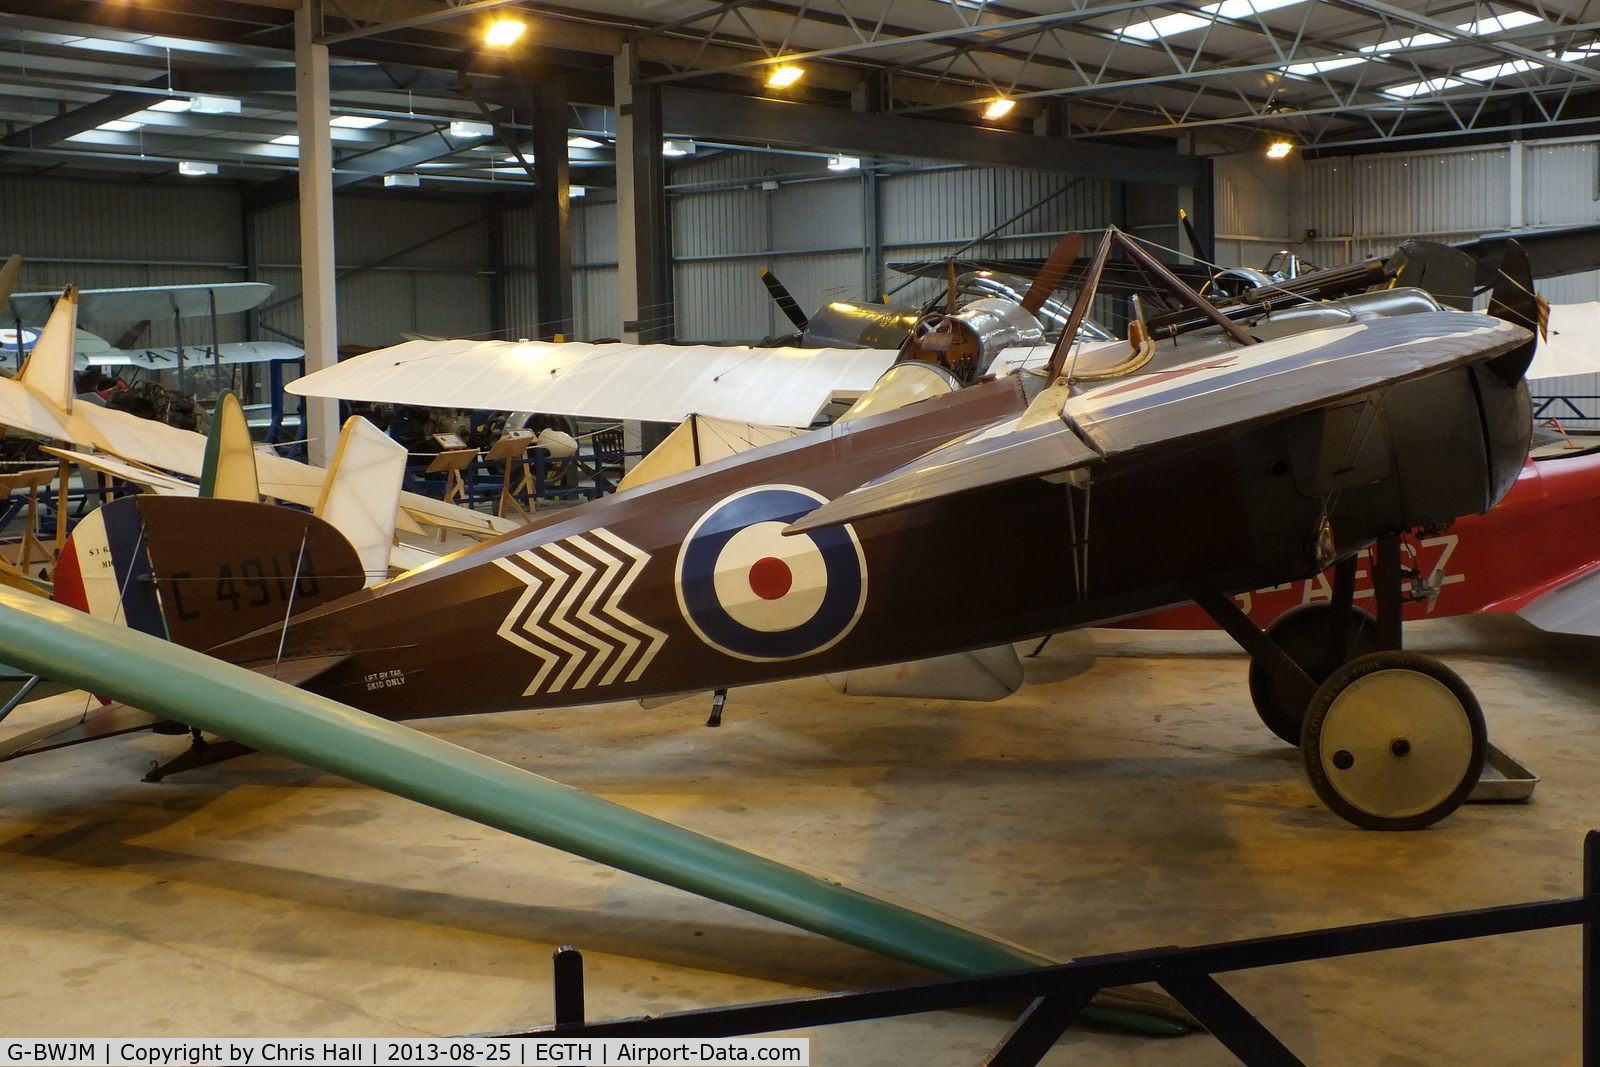 G-BWJM, 1981 Bristol M-1C Replica C/N NAW-2, The Shuttleworth Collection, Old Warden